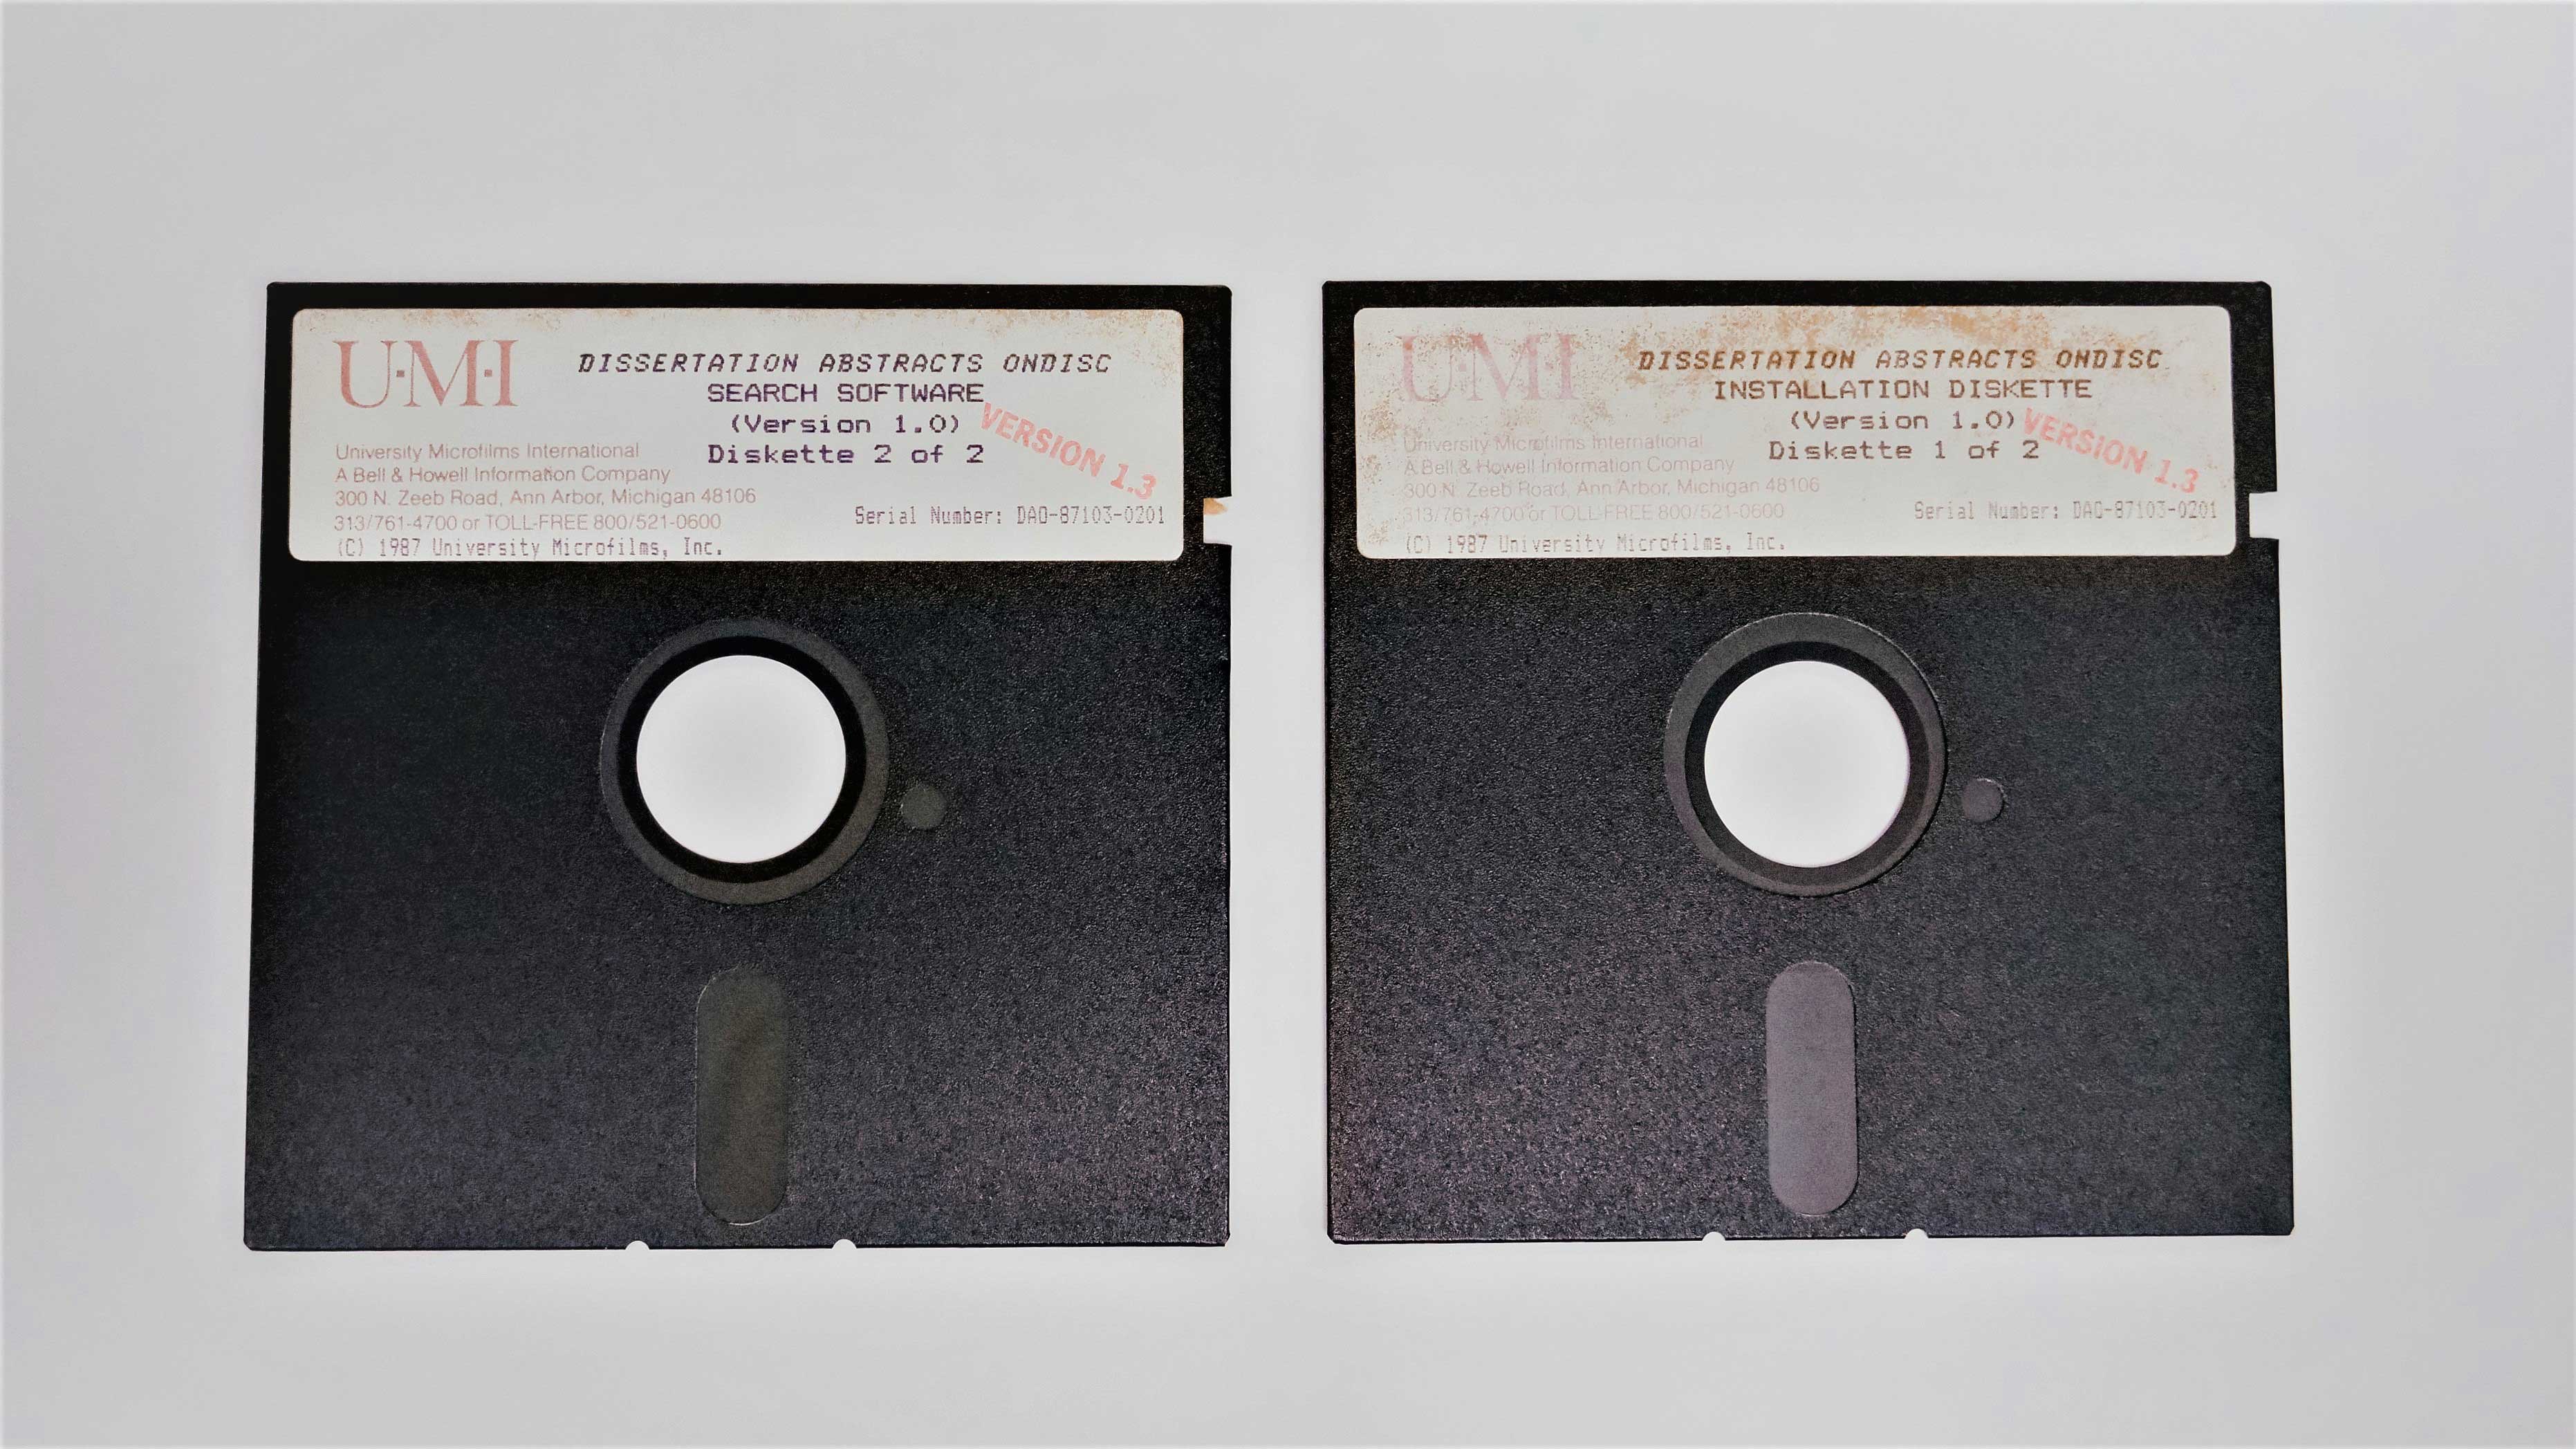 5.25 inch floppy disk - dissertation abstracts